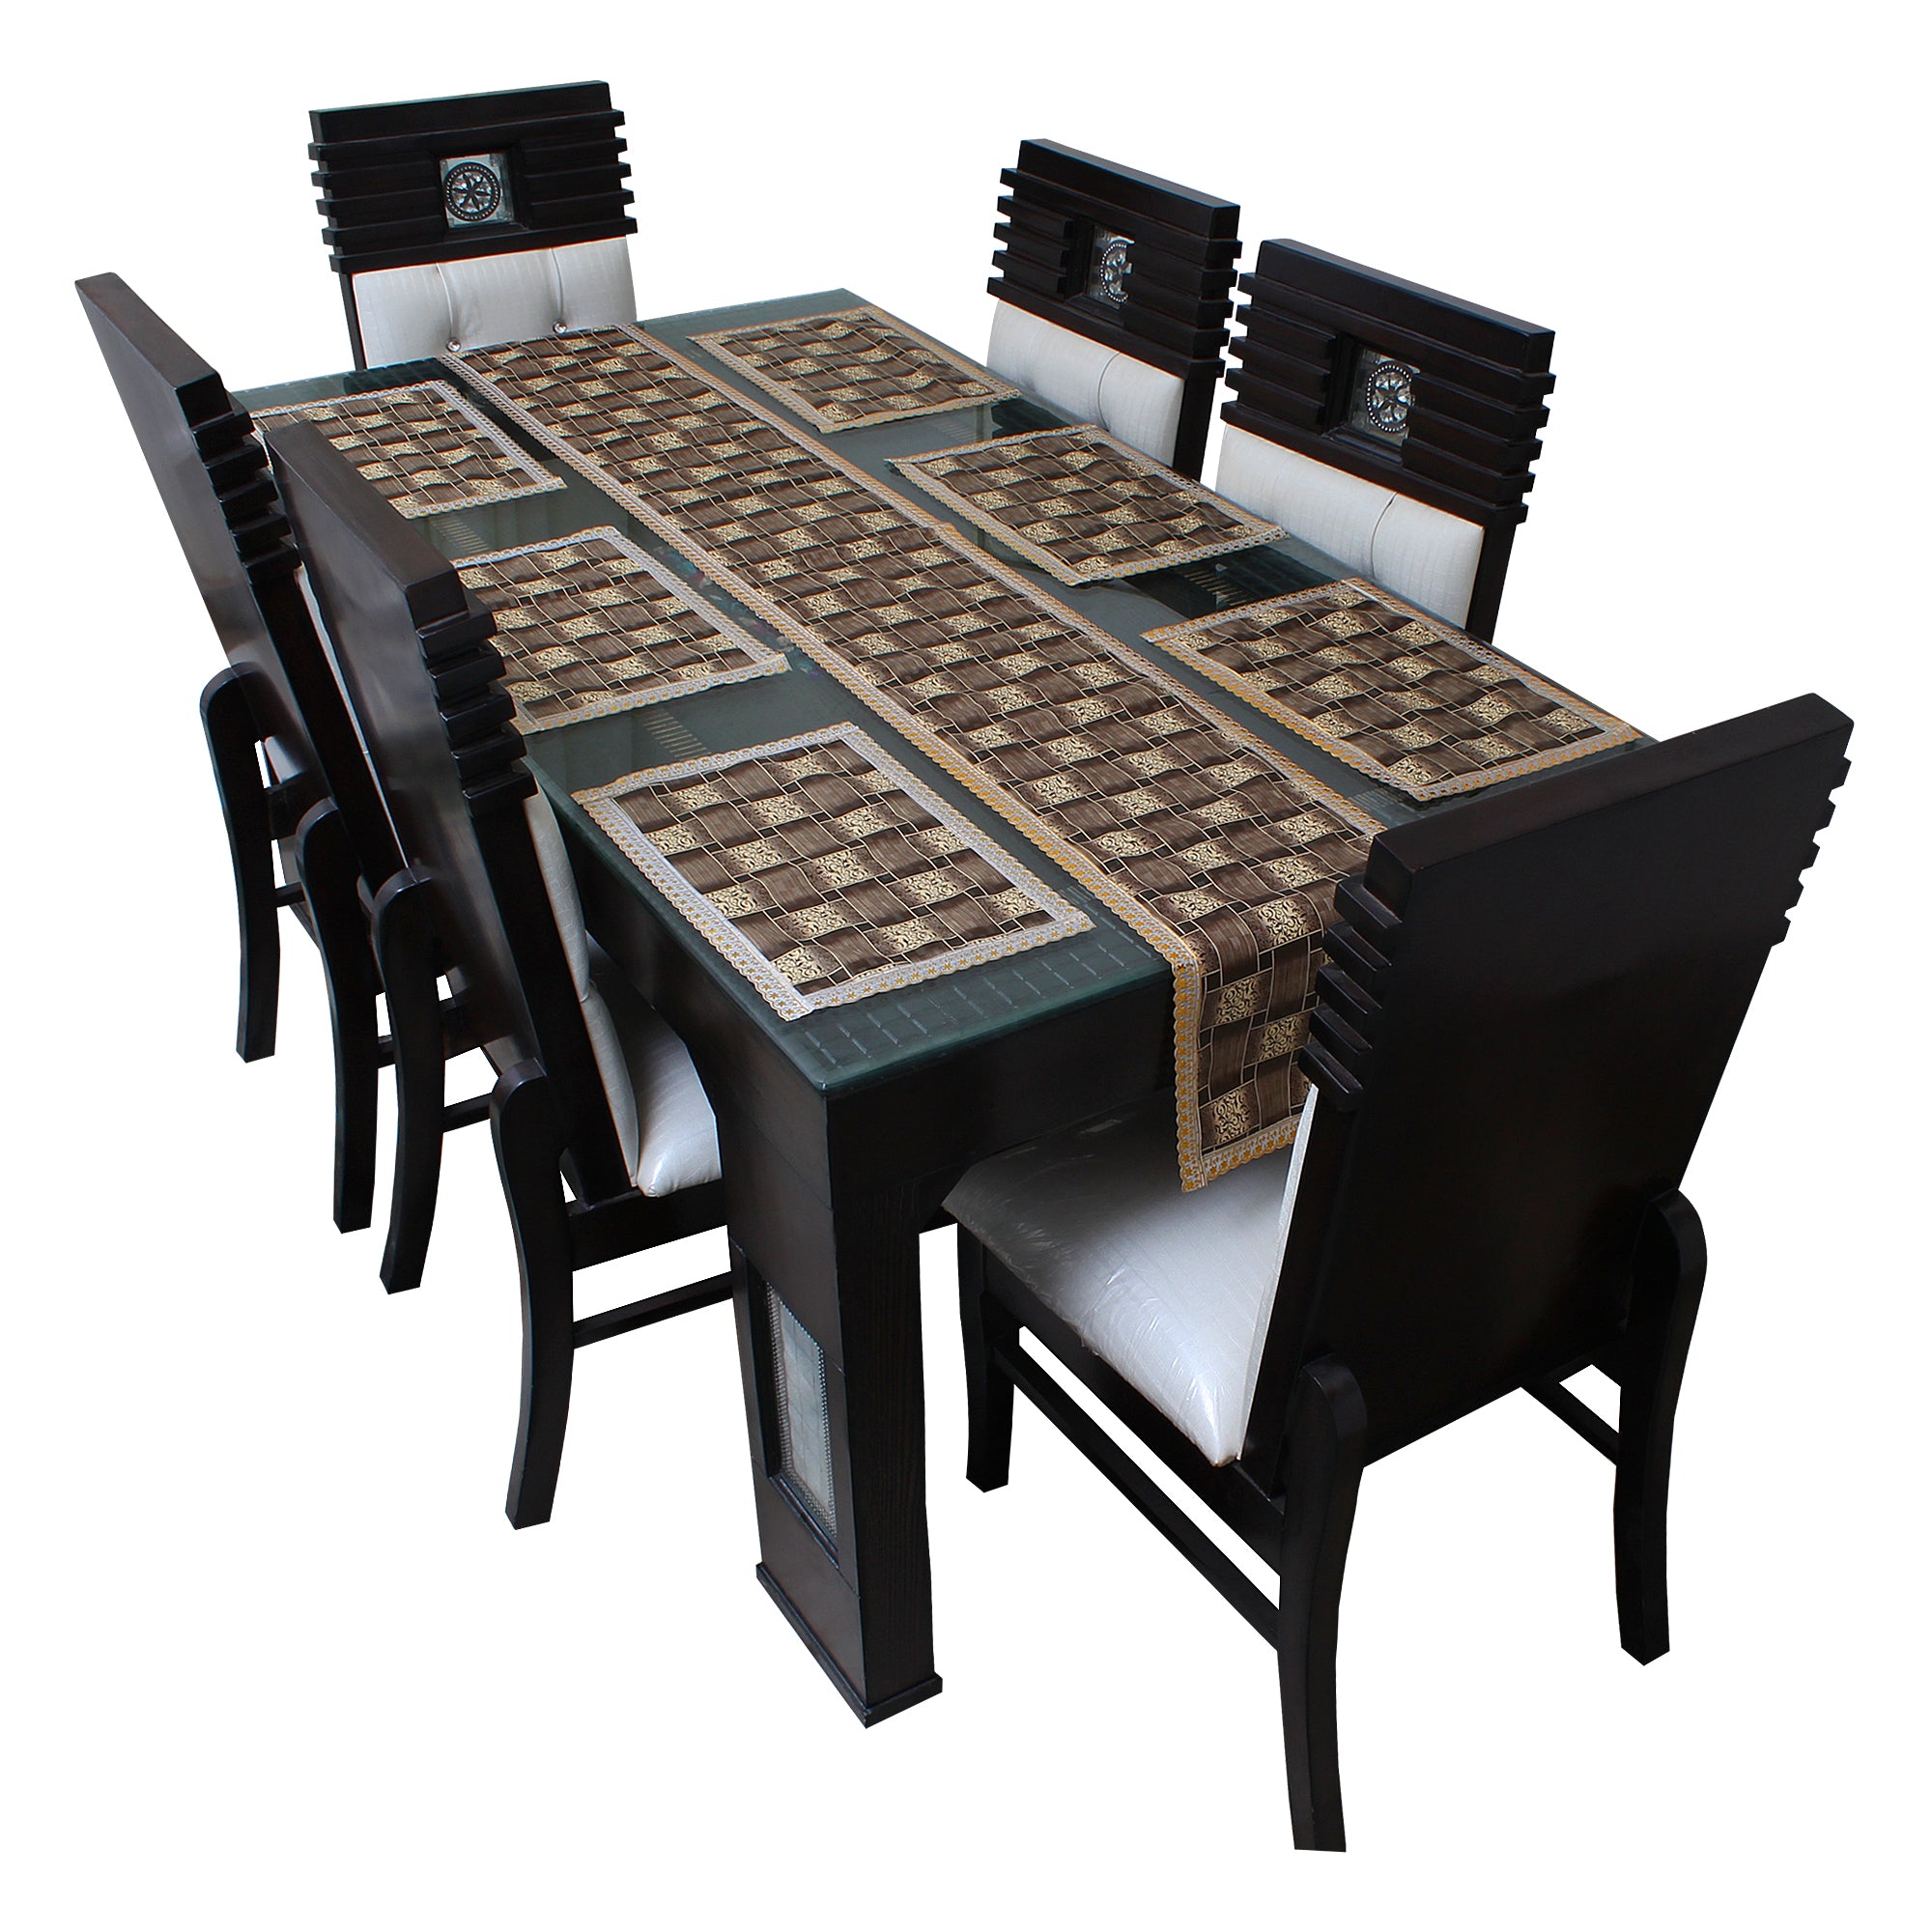 Waterproof & Dustproof Dining Table Runner With 6 Placemats, SA40 - Dream Care Furnishings Private Limited